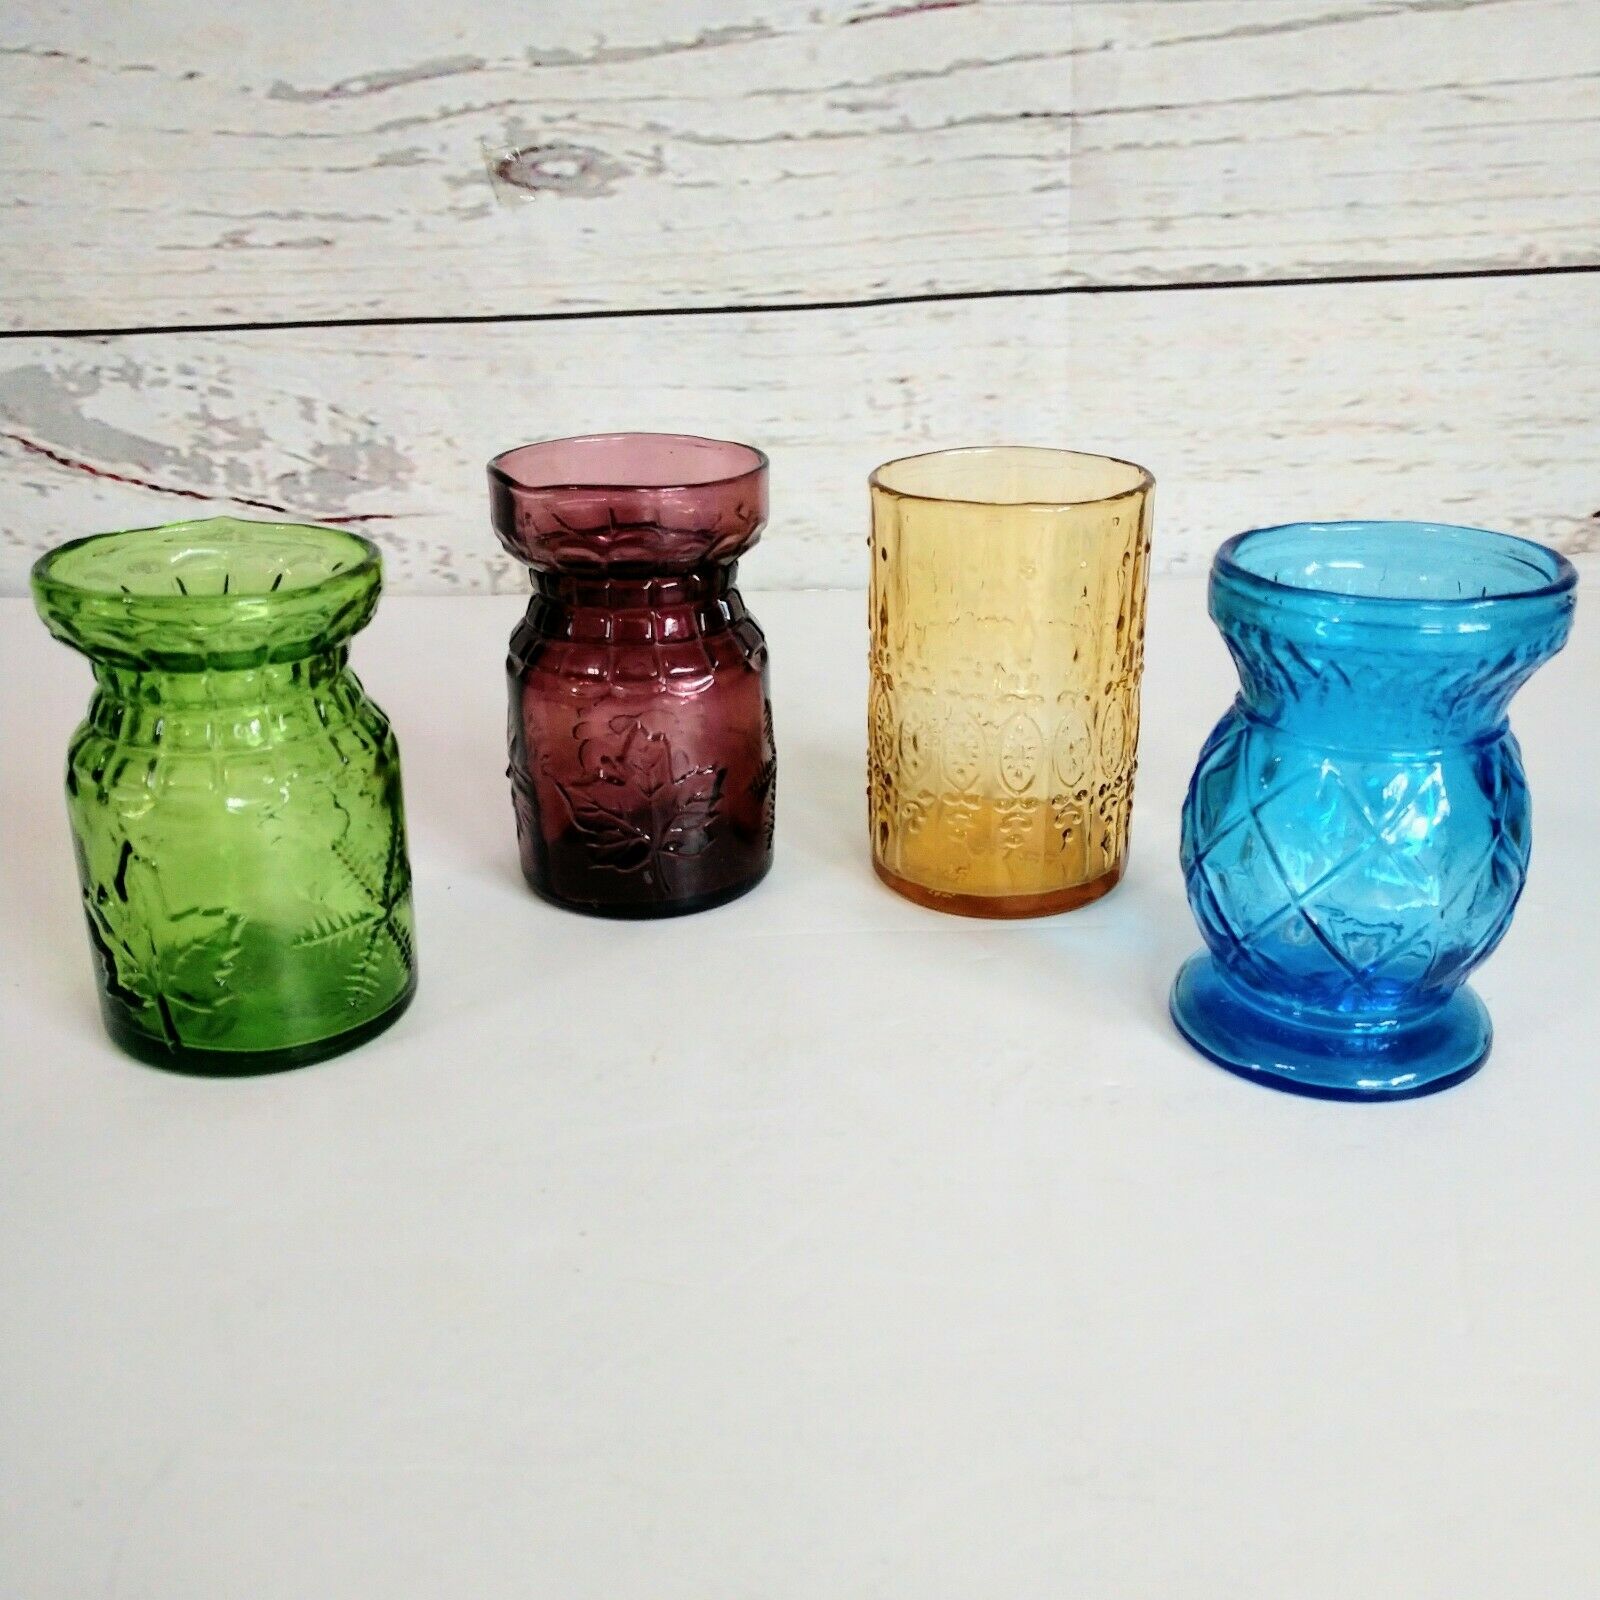 4 Vtg. Wheaton Glass Toothpick Holders Blue, Green, Cranberry, Amber Approx. 3"